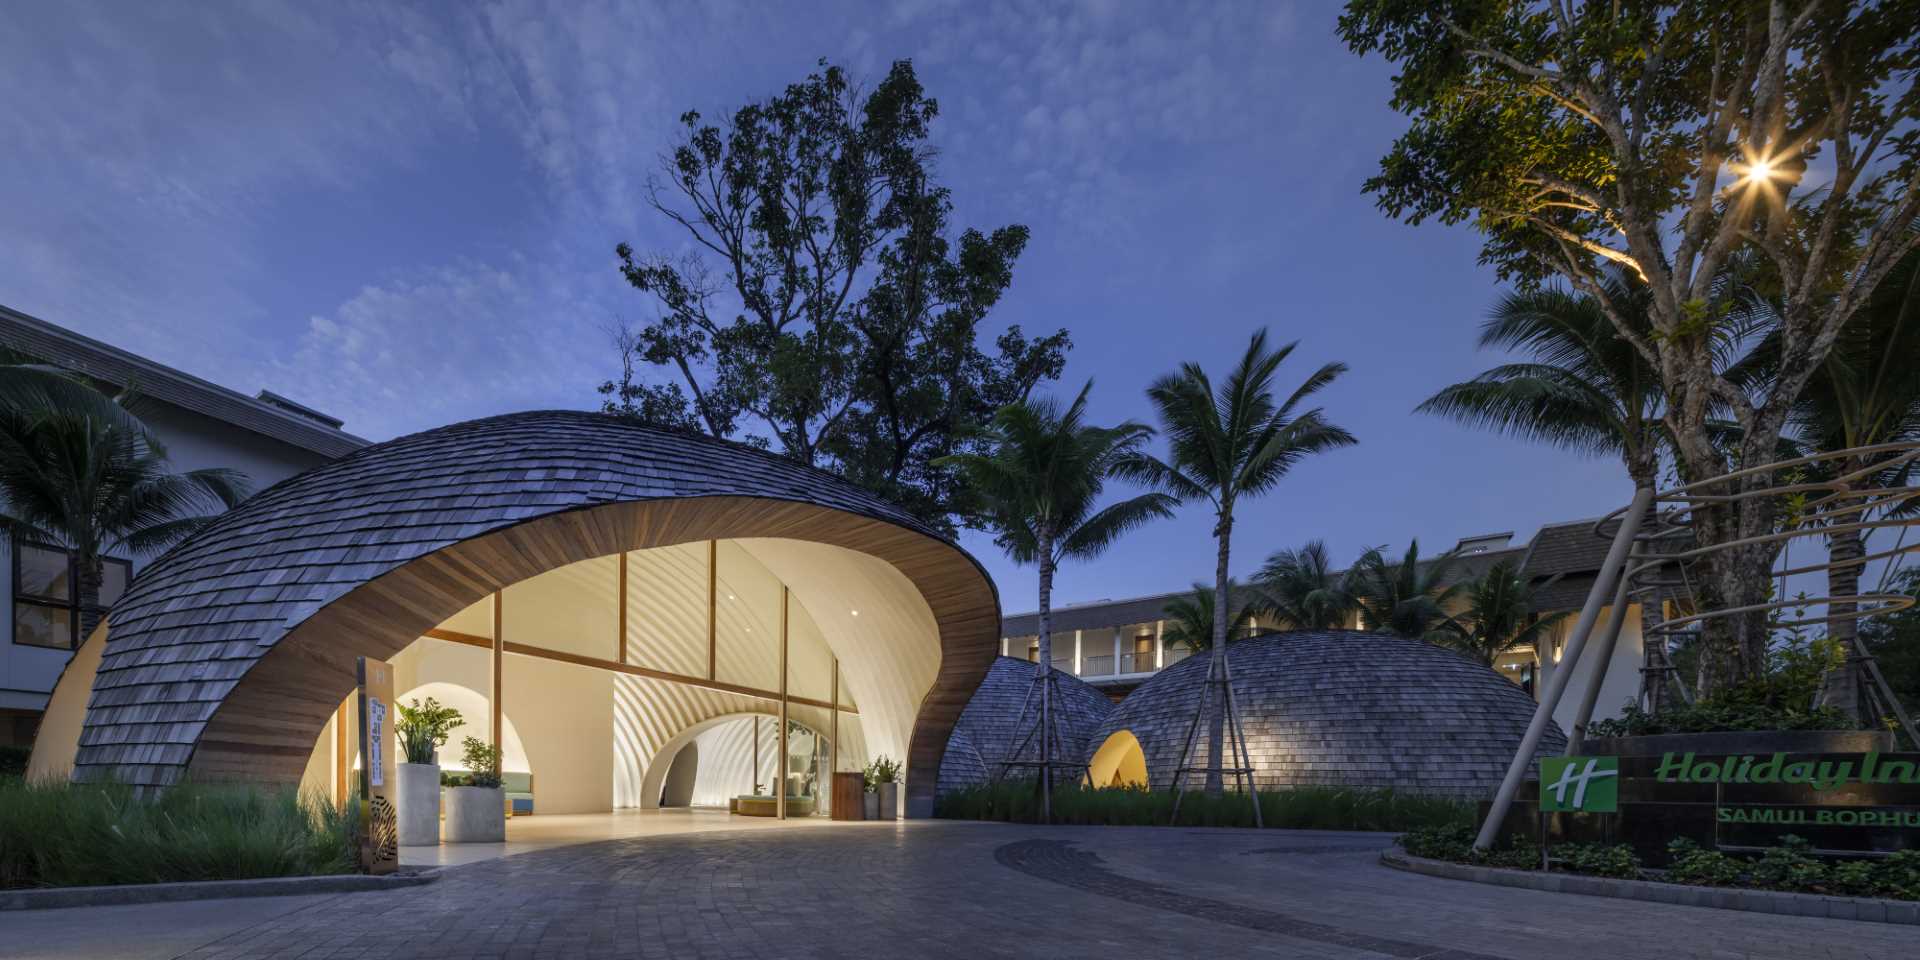 A modern hotel lobby whose design is inspired by the shape and interior of a coconut.